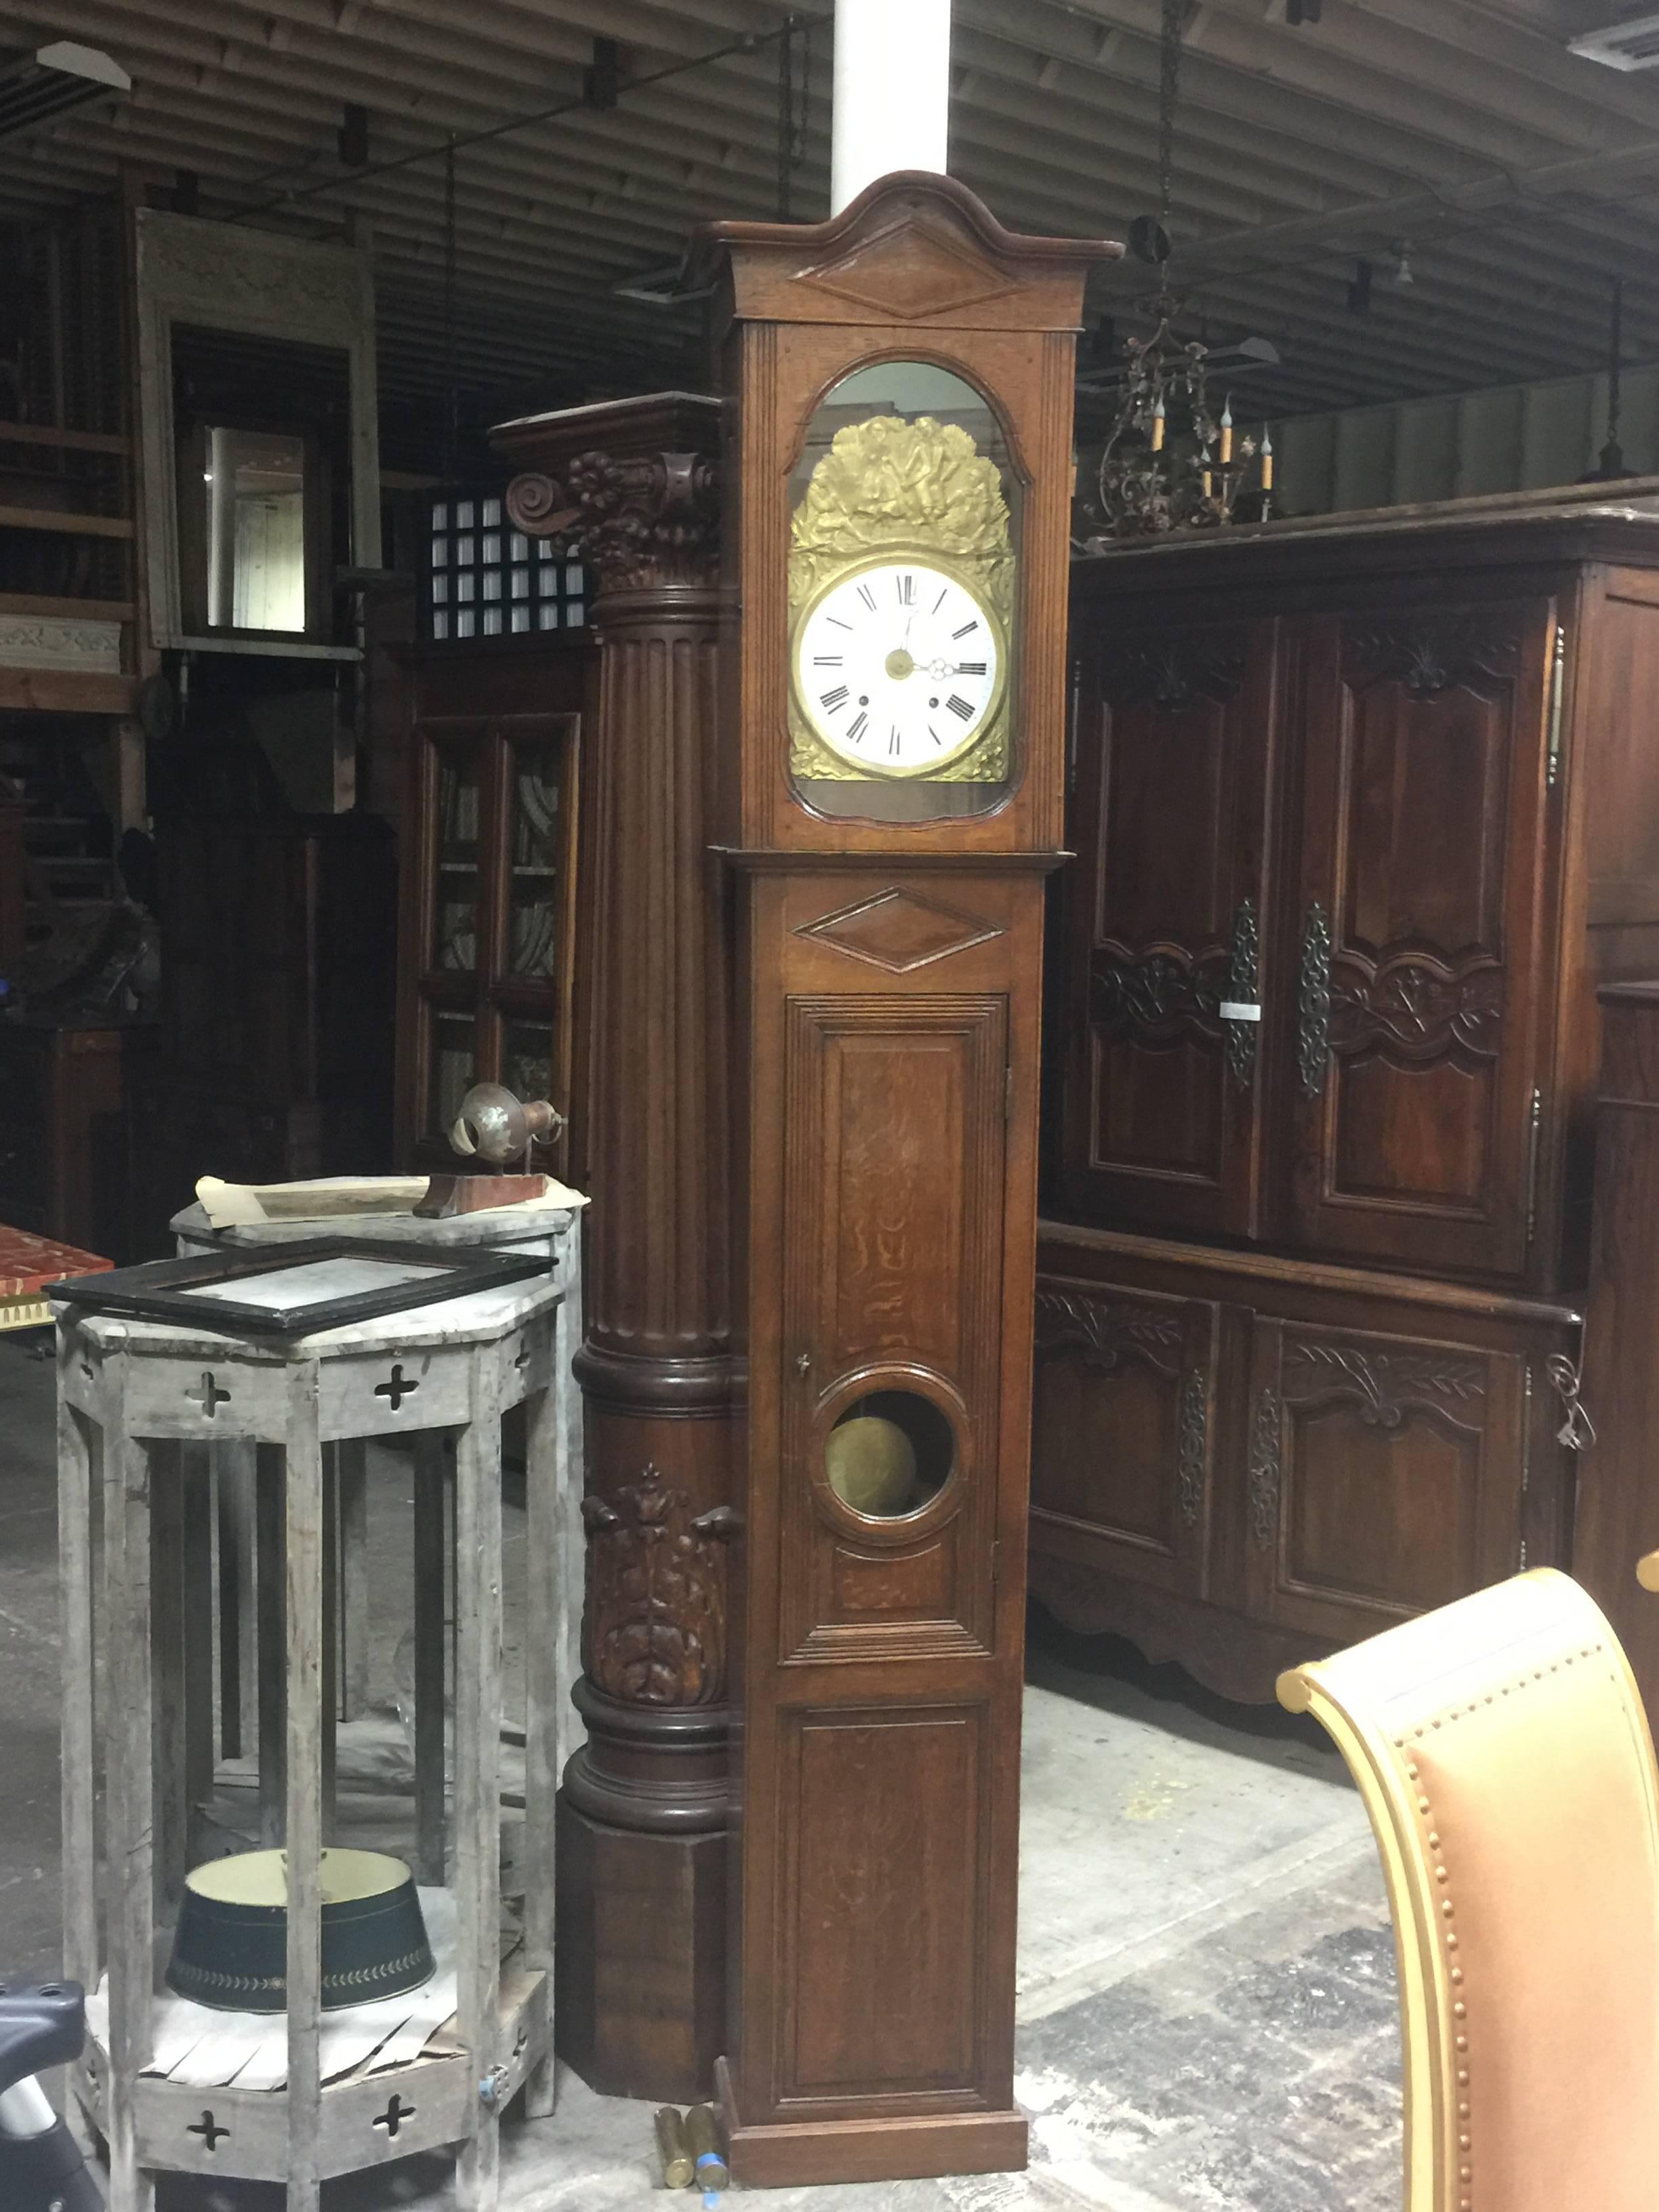 19th century French oak grandfather clock 19th century movement not original to the case (in running order).
Dimensions: 8' H X 9'' D X 17'' W.